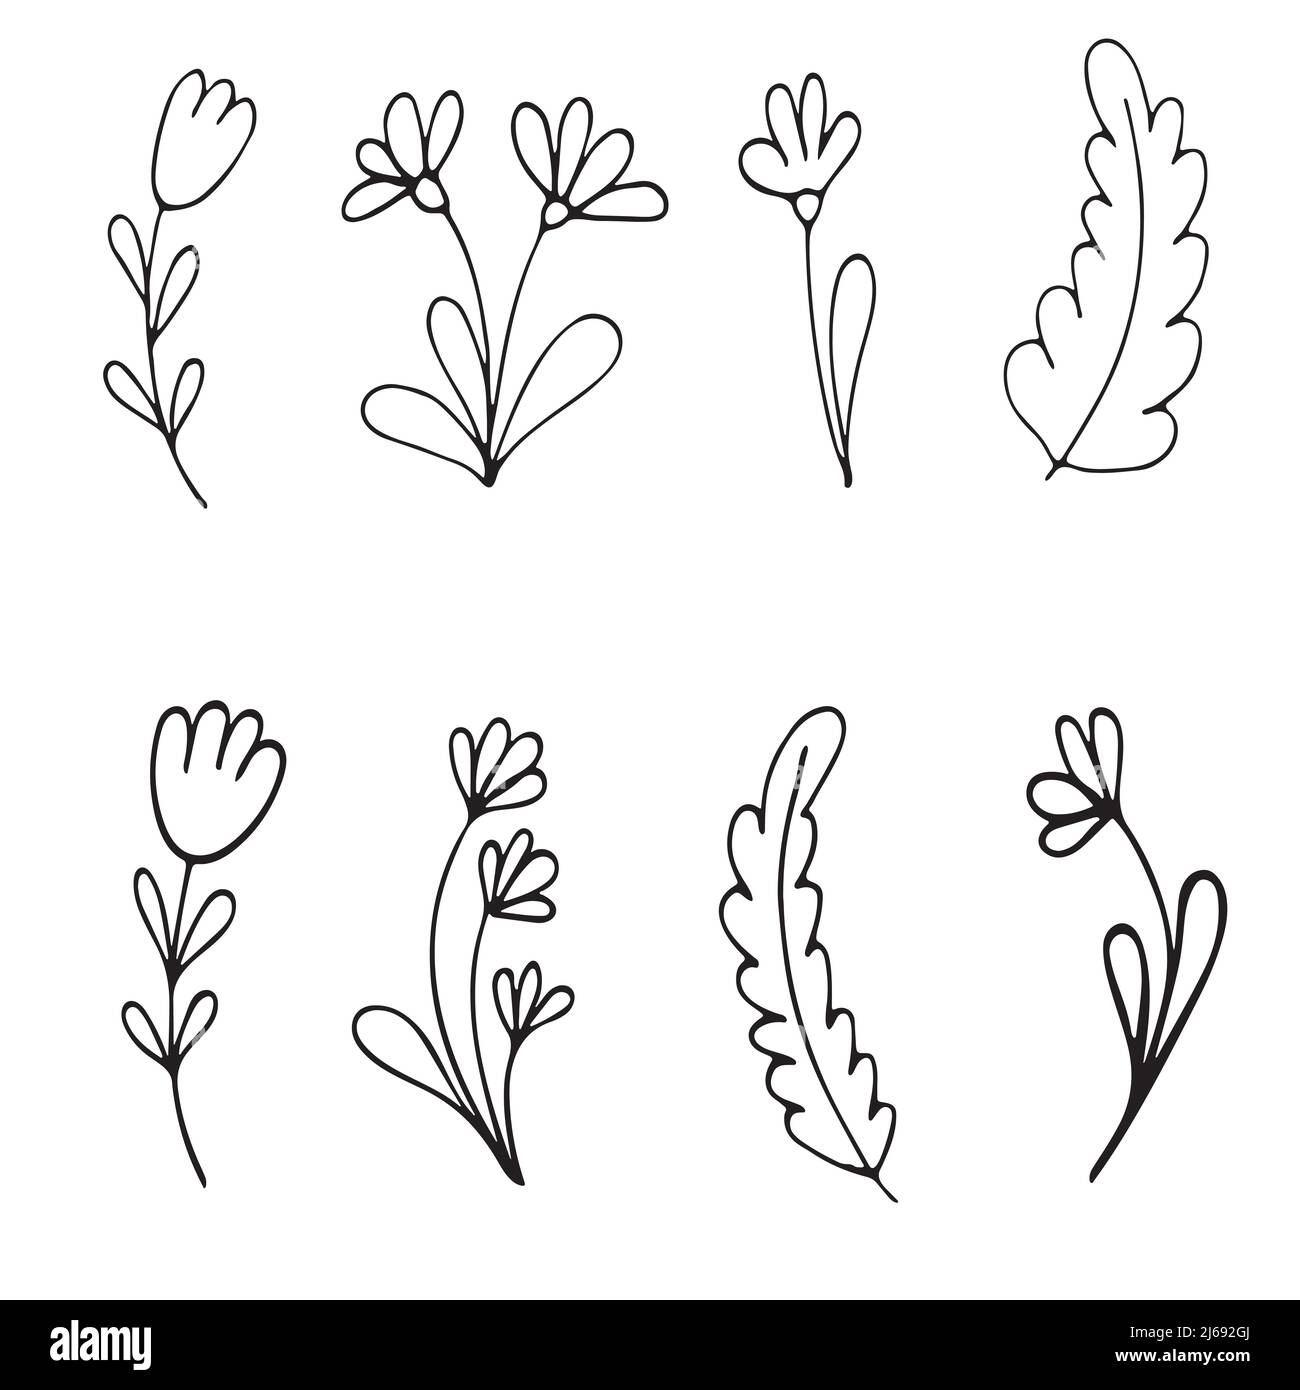 Hand drawn vector winter floral elements. Winter branches and leaves. Hand  drawn floral elements. Vintage botanical illustrations. Stock Vector